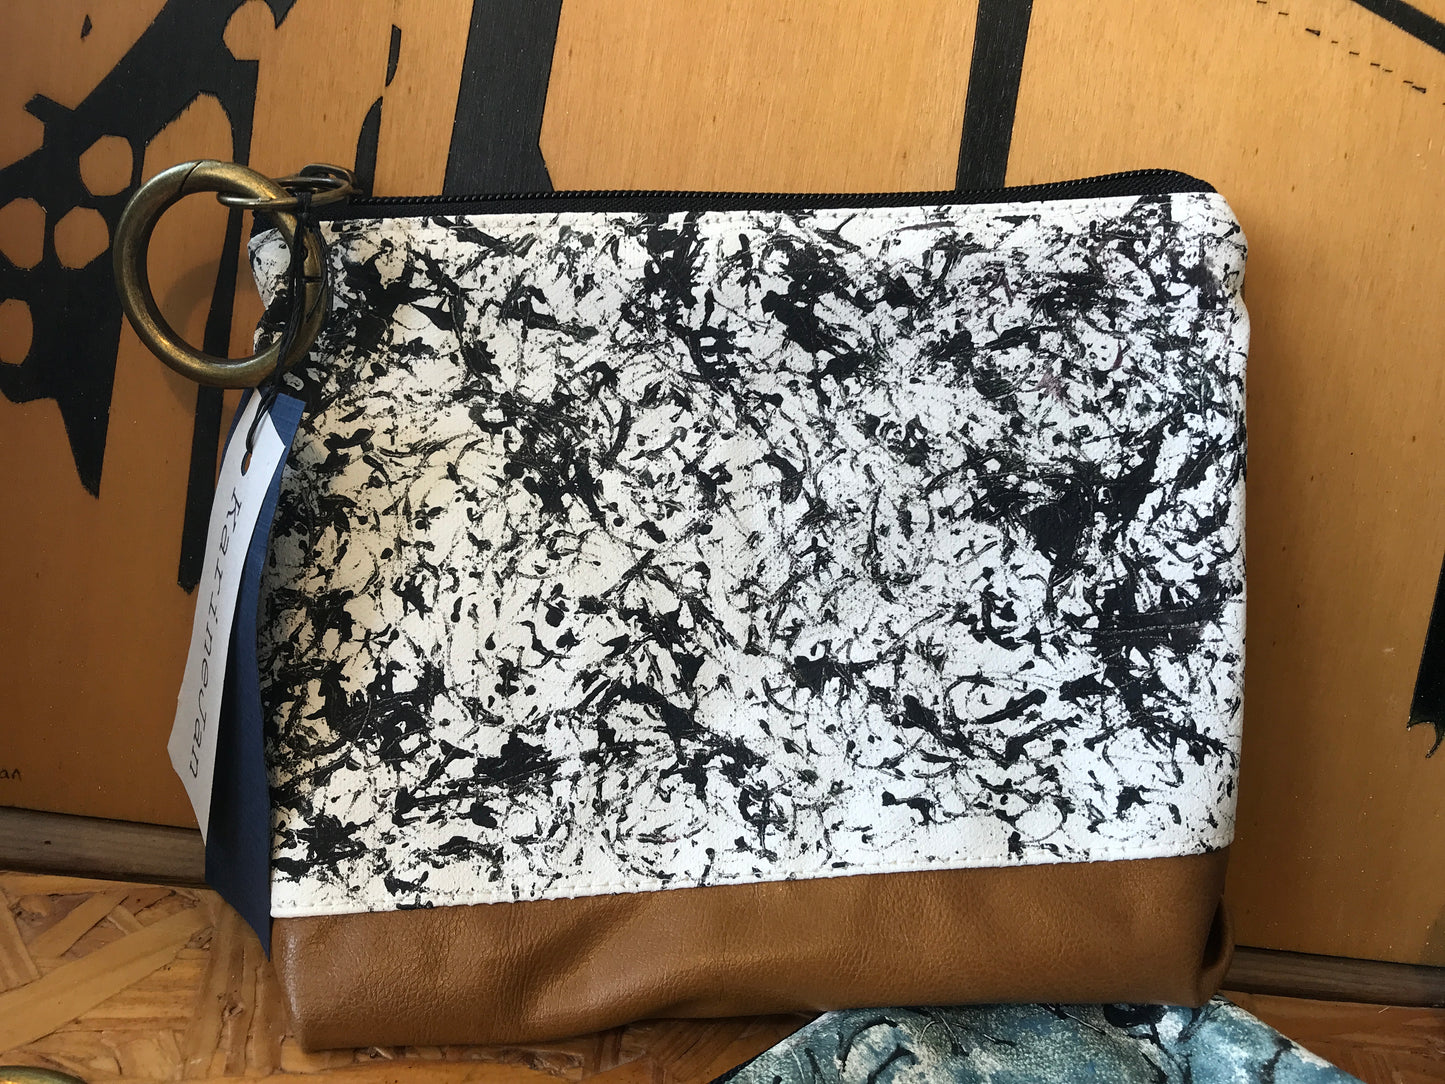 Hand crafted and painted vegan clutch